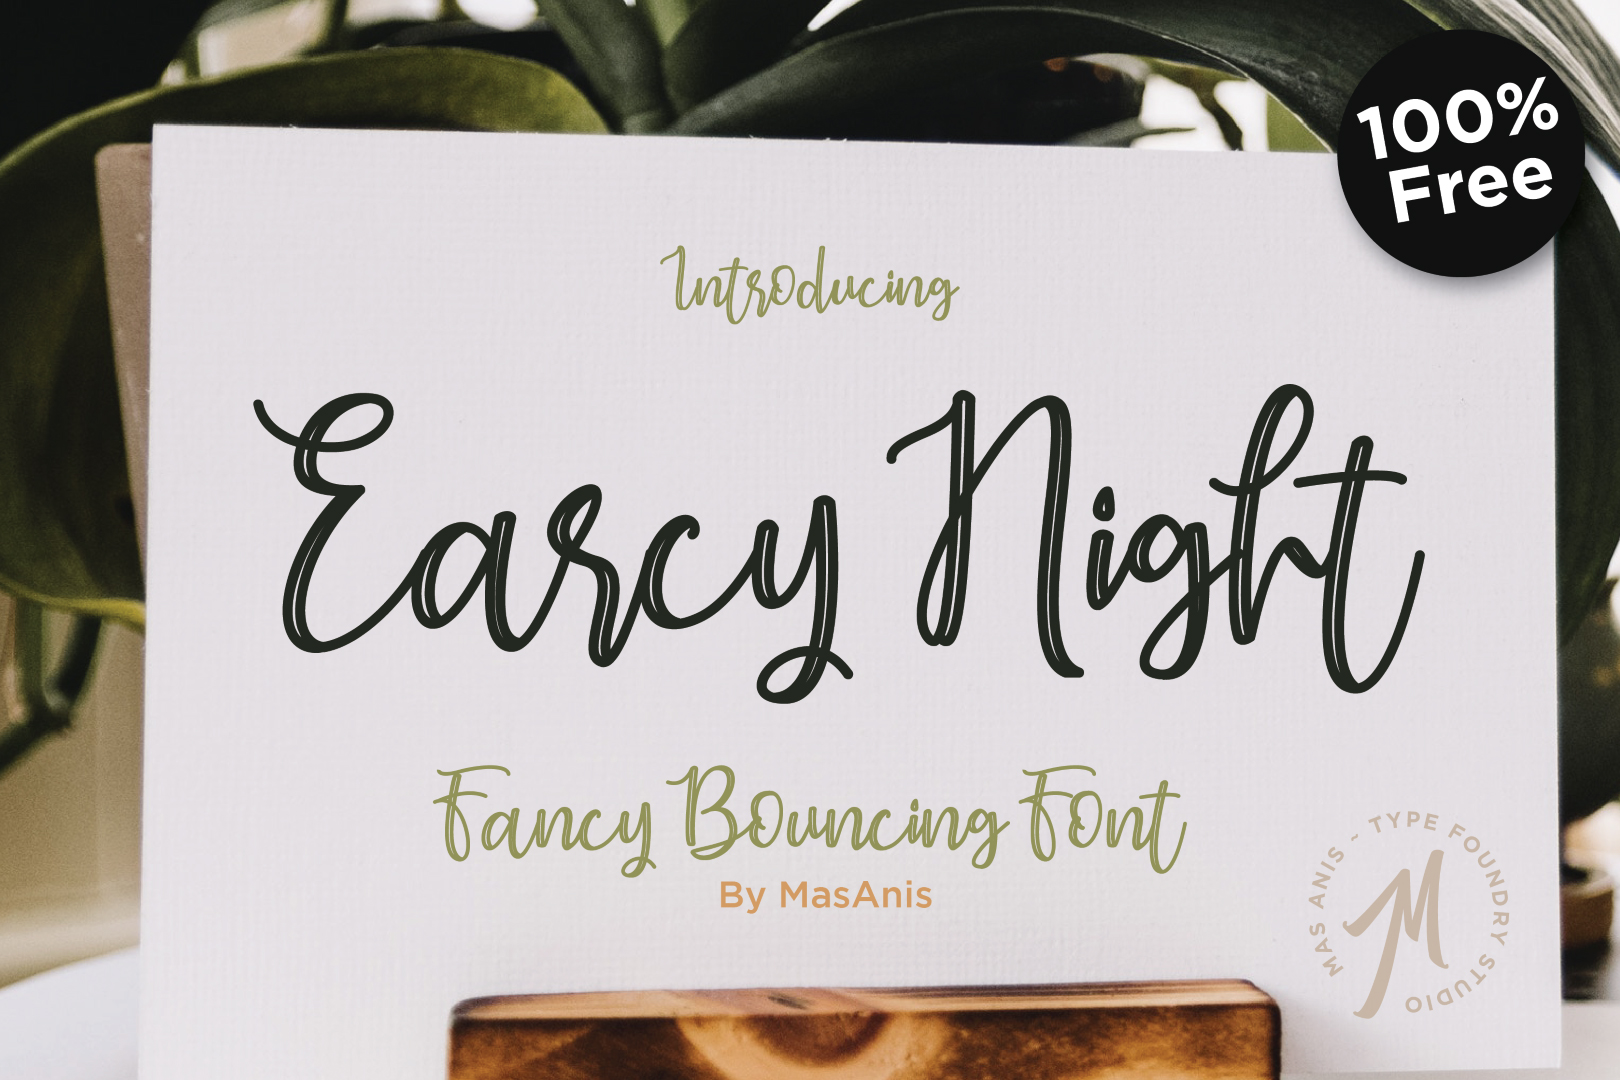 Earcy Night Free Font